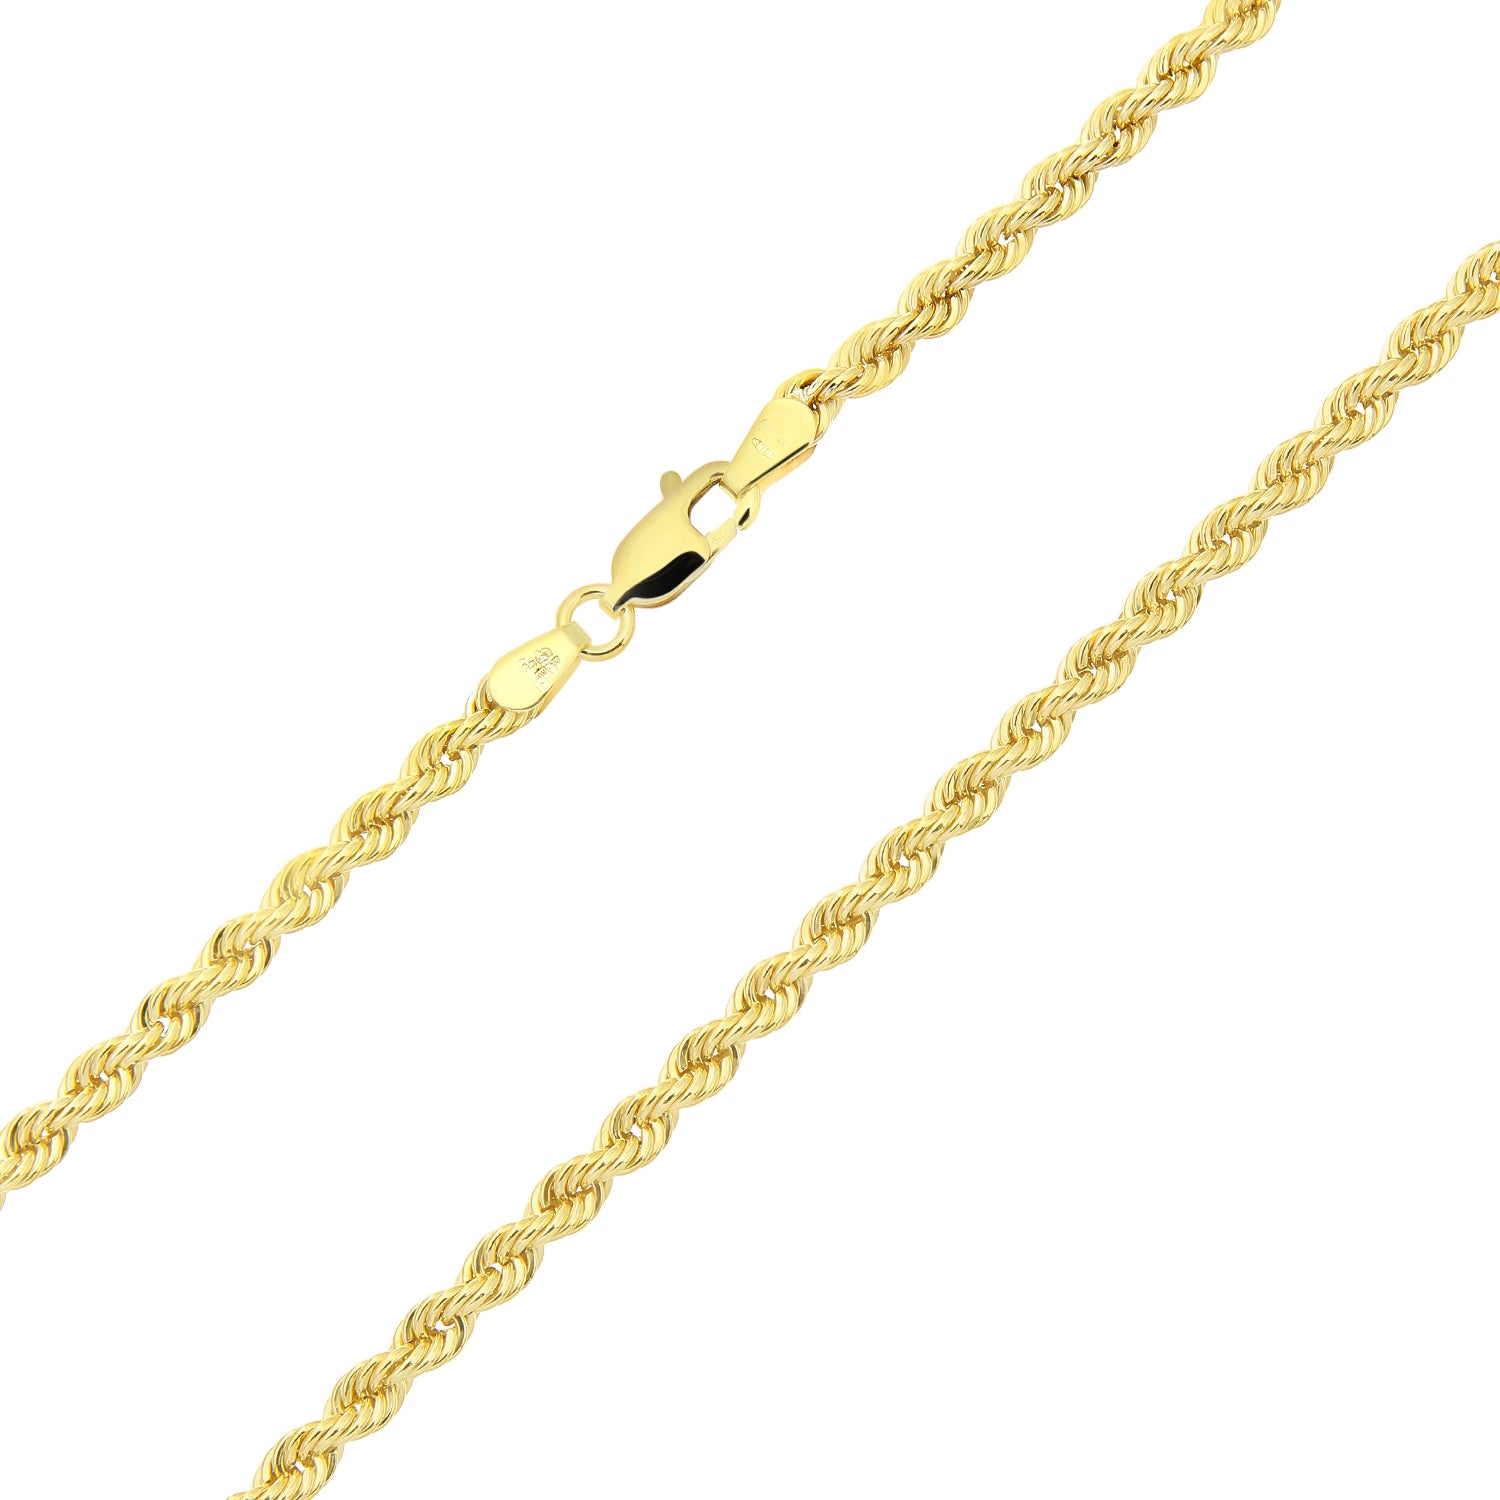 9ct Gold  Rope Chain Necklace 3.5mm 18 inch - 060AXLHVC18